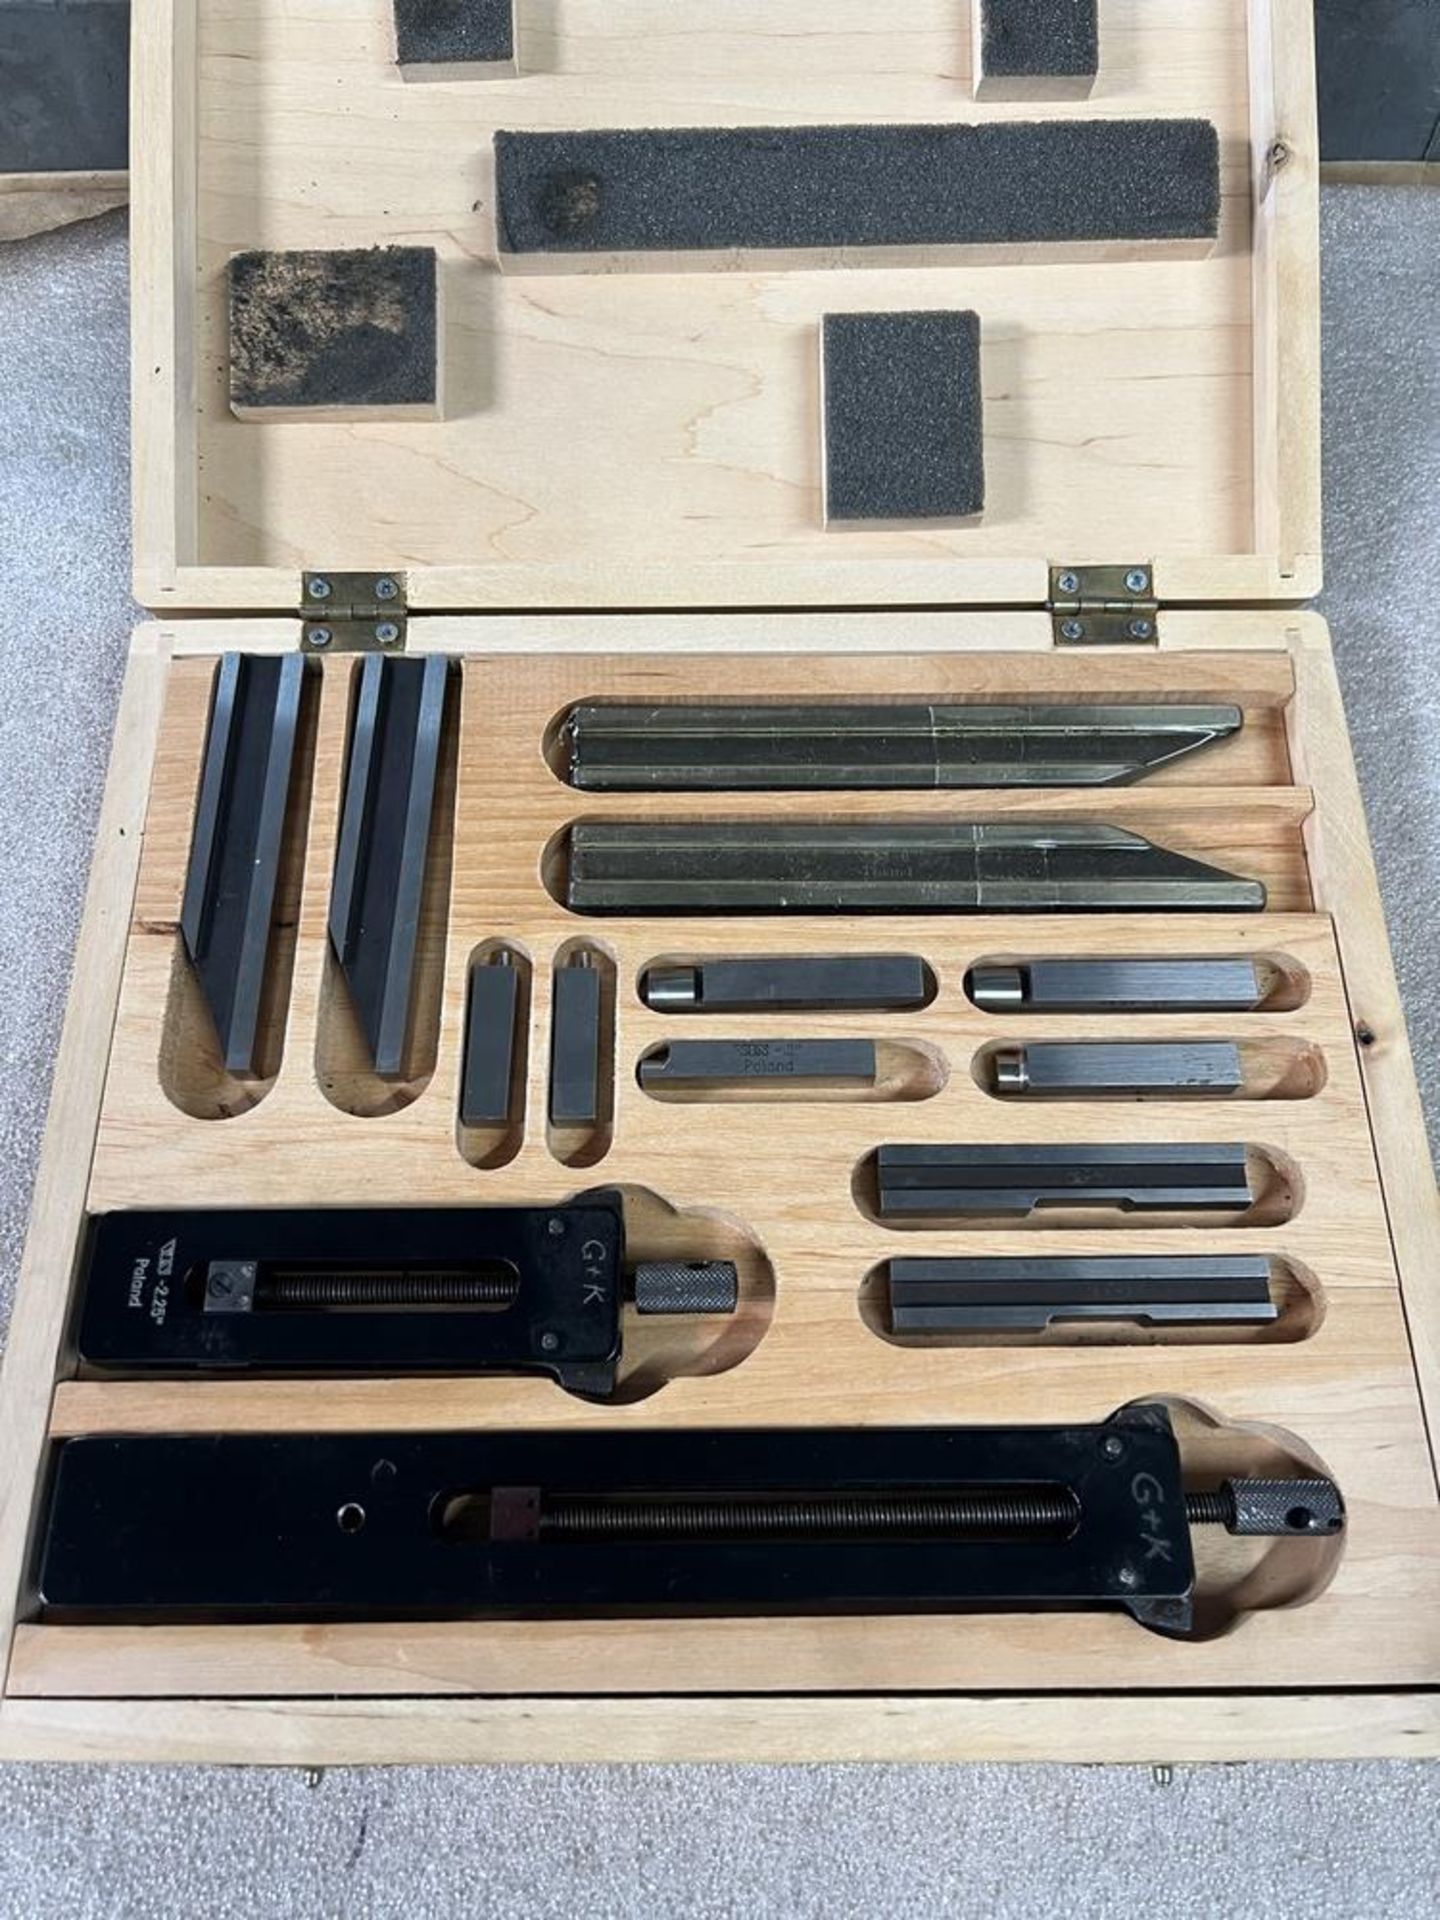 Fowler Gage Block Holder Set Made in Poland - Image 2 of 6